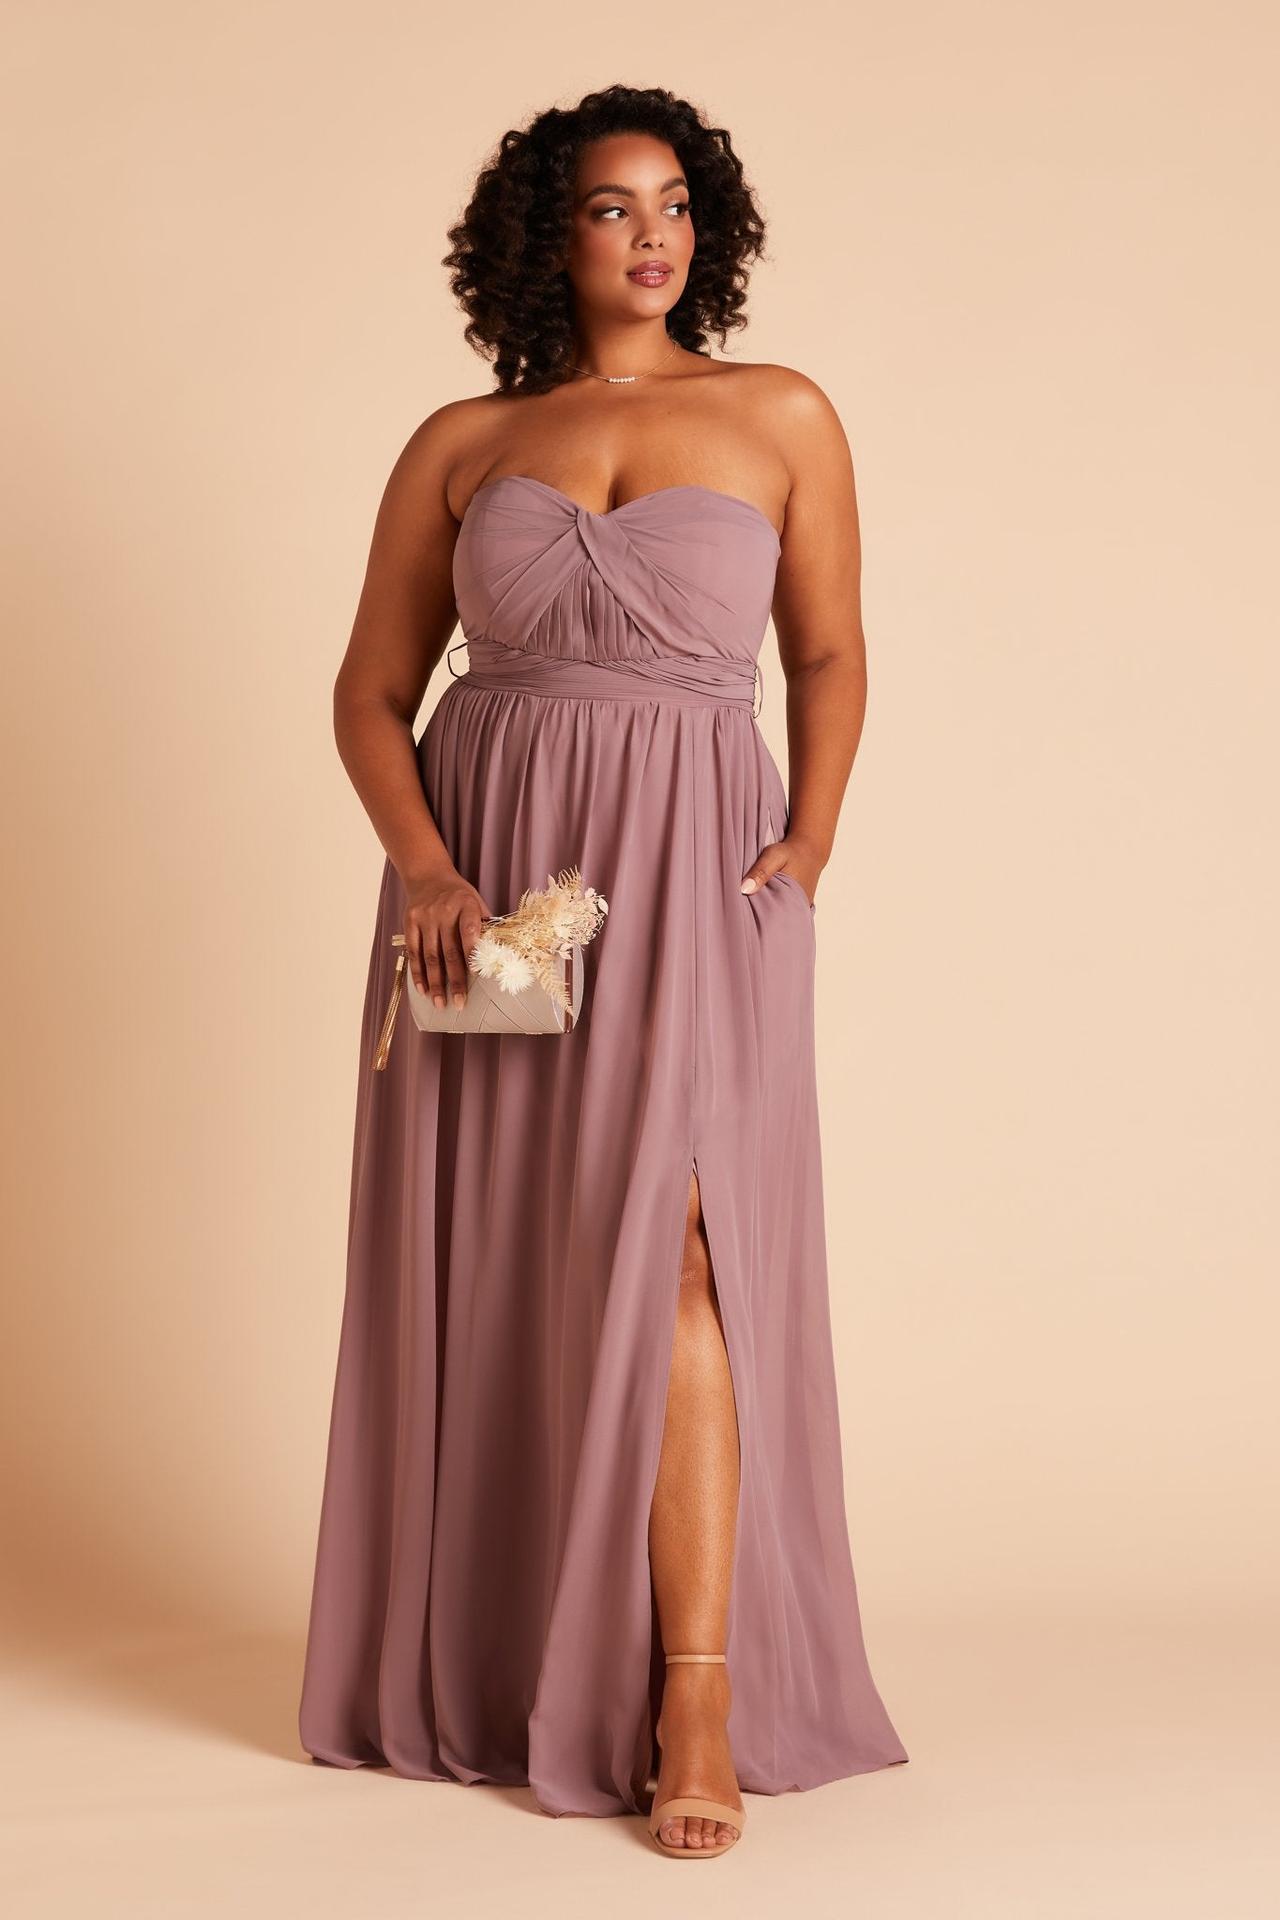 22 Maternity Bridesmaid Dresses for Expectant Bridesmaids